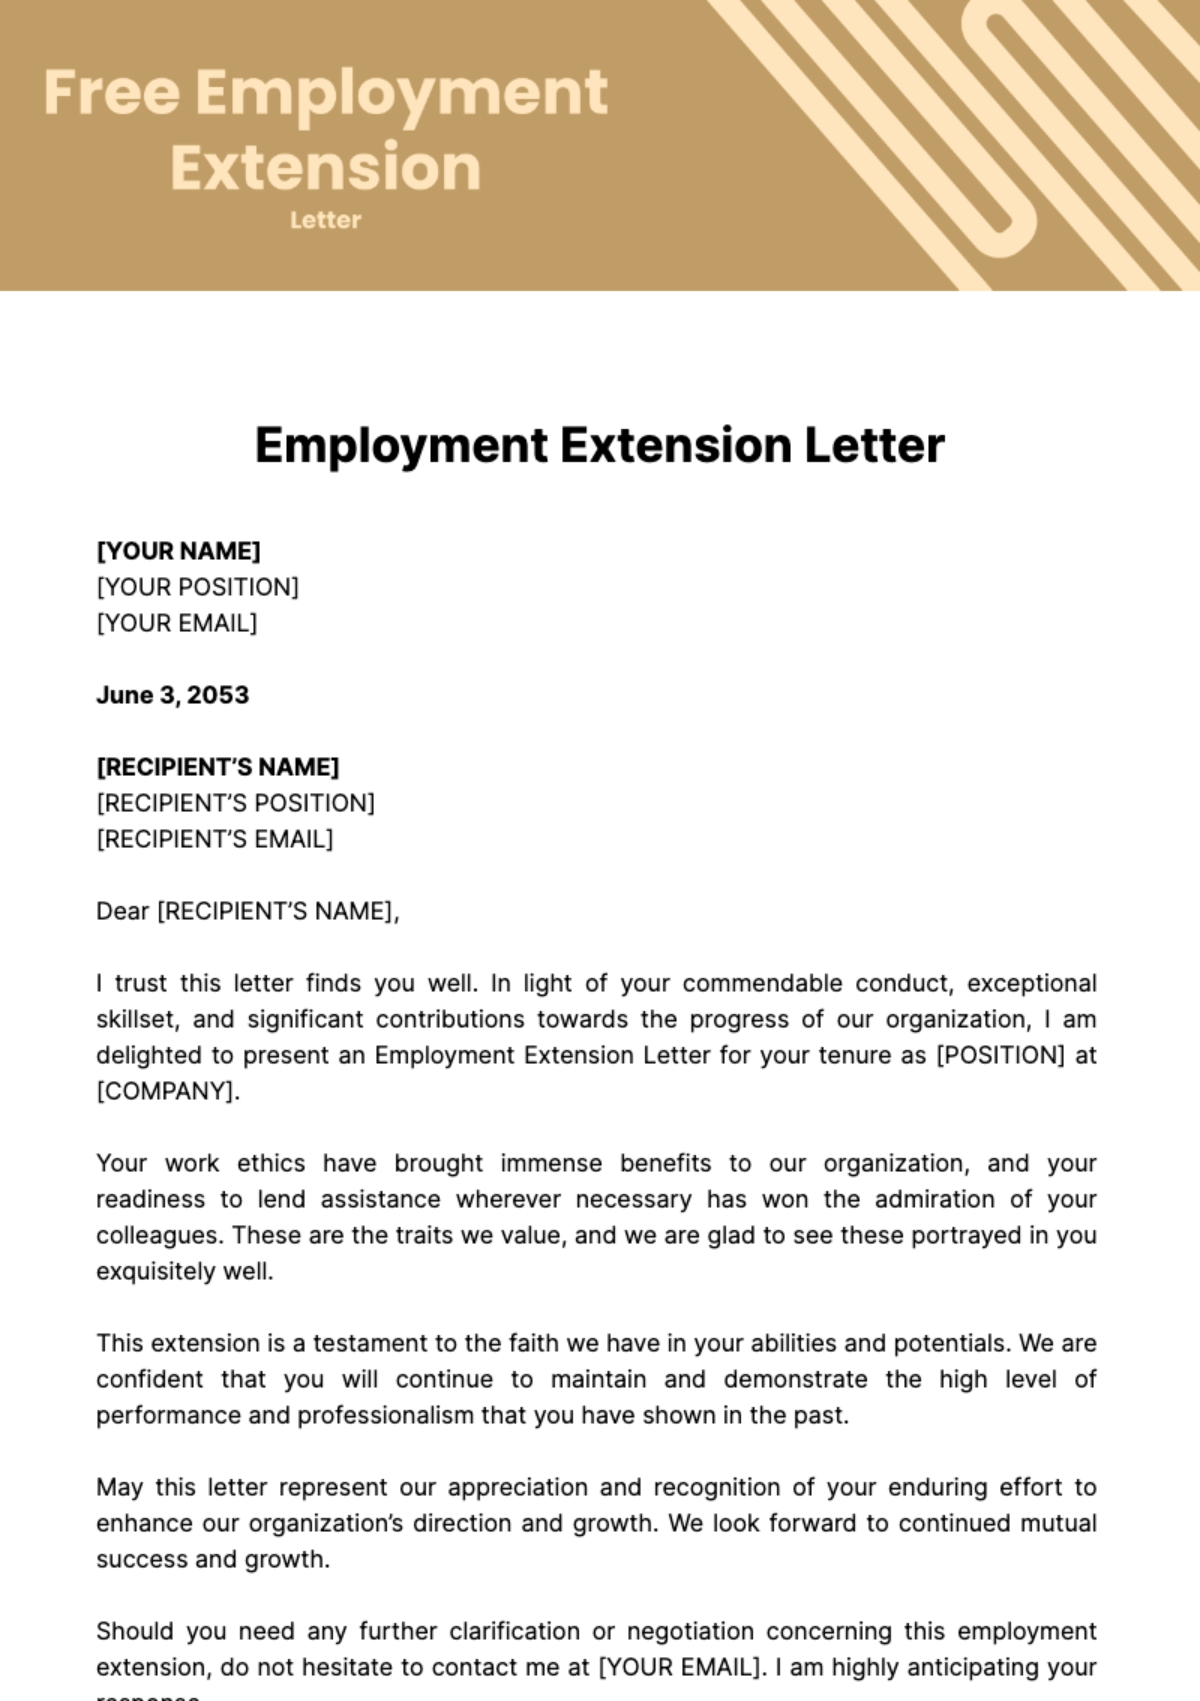 Free Employment Extension Letter Template